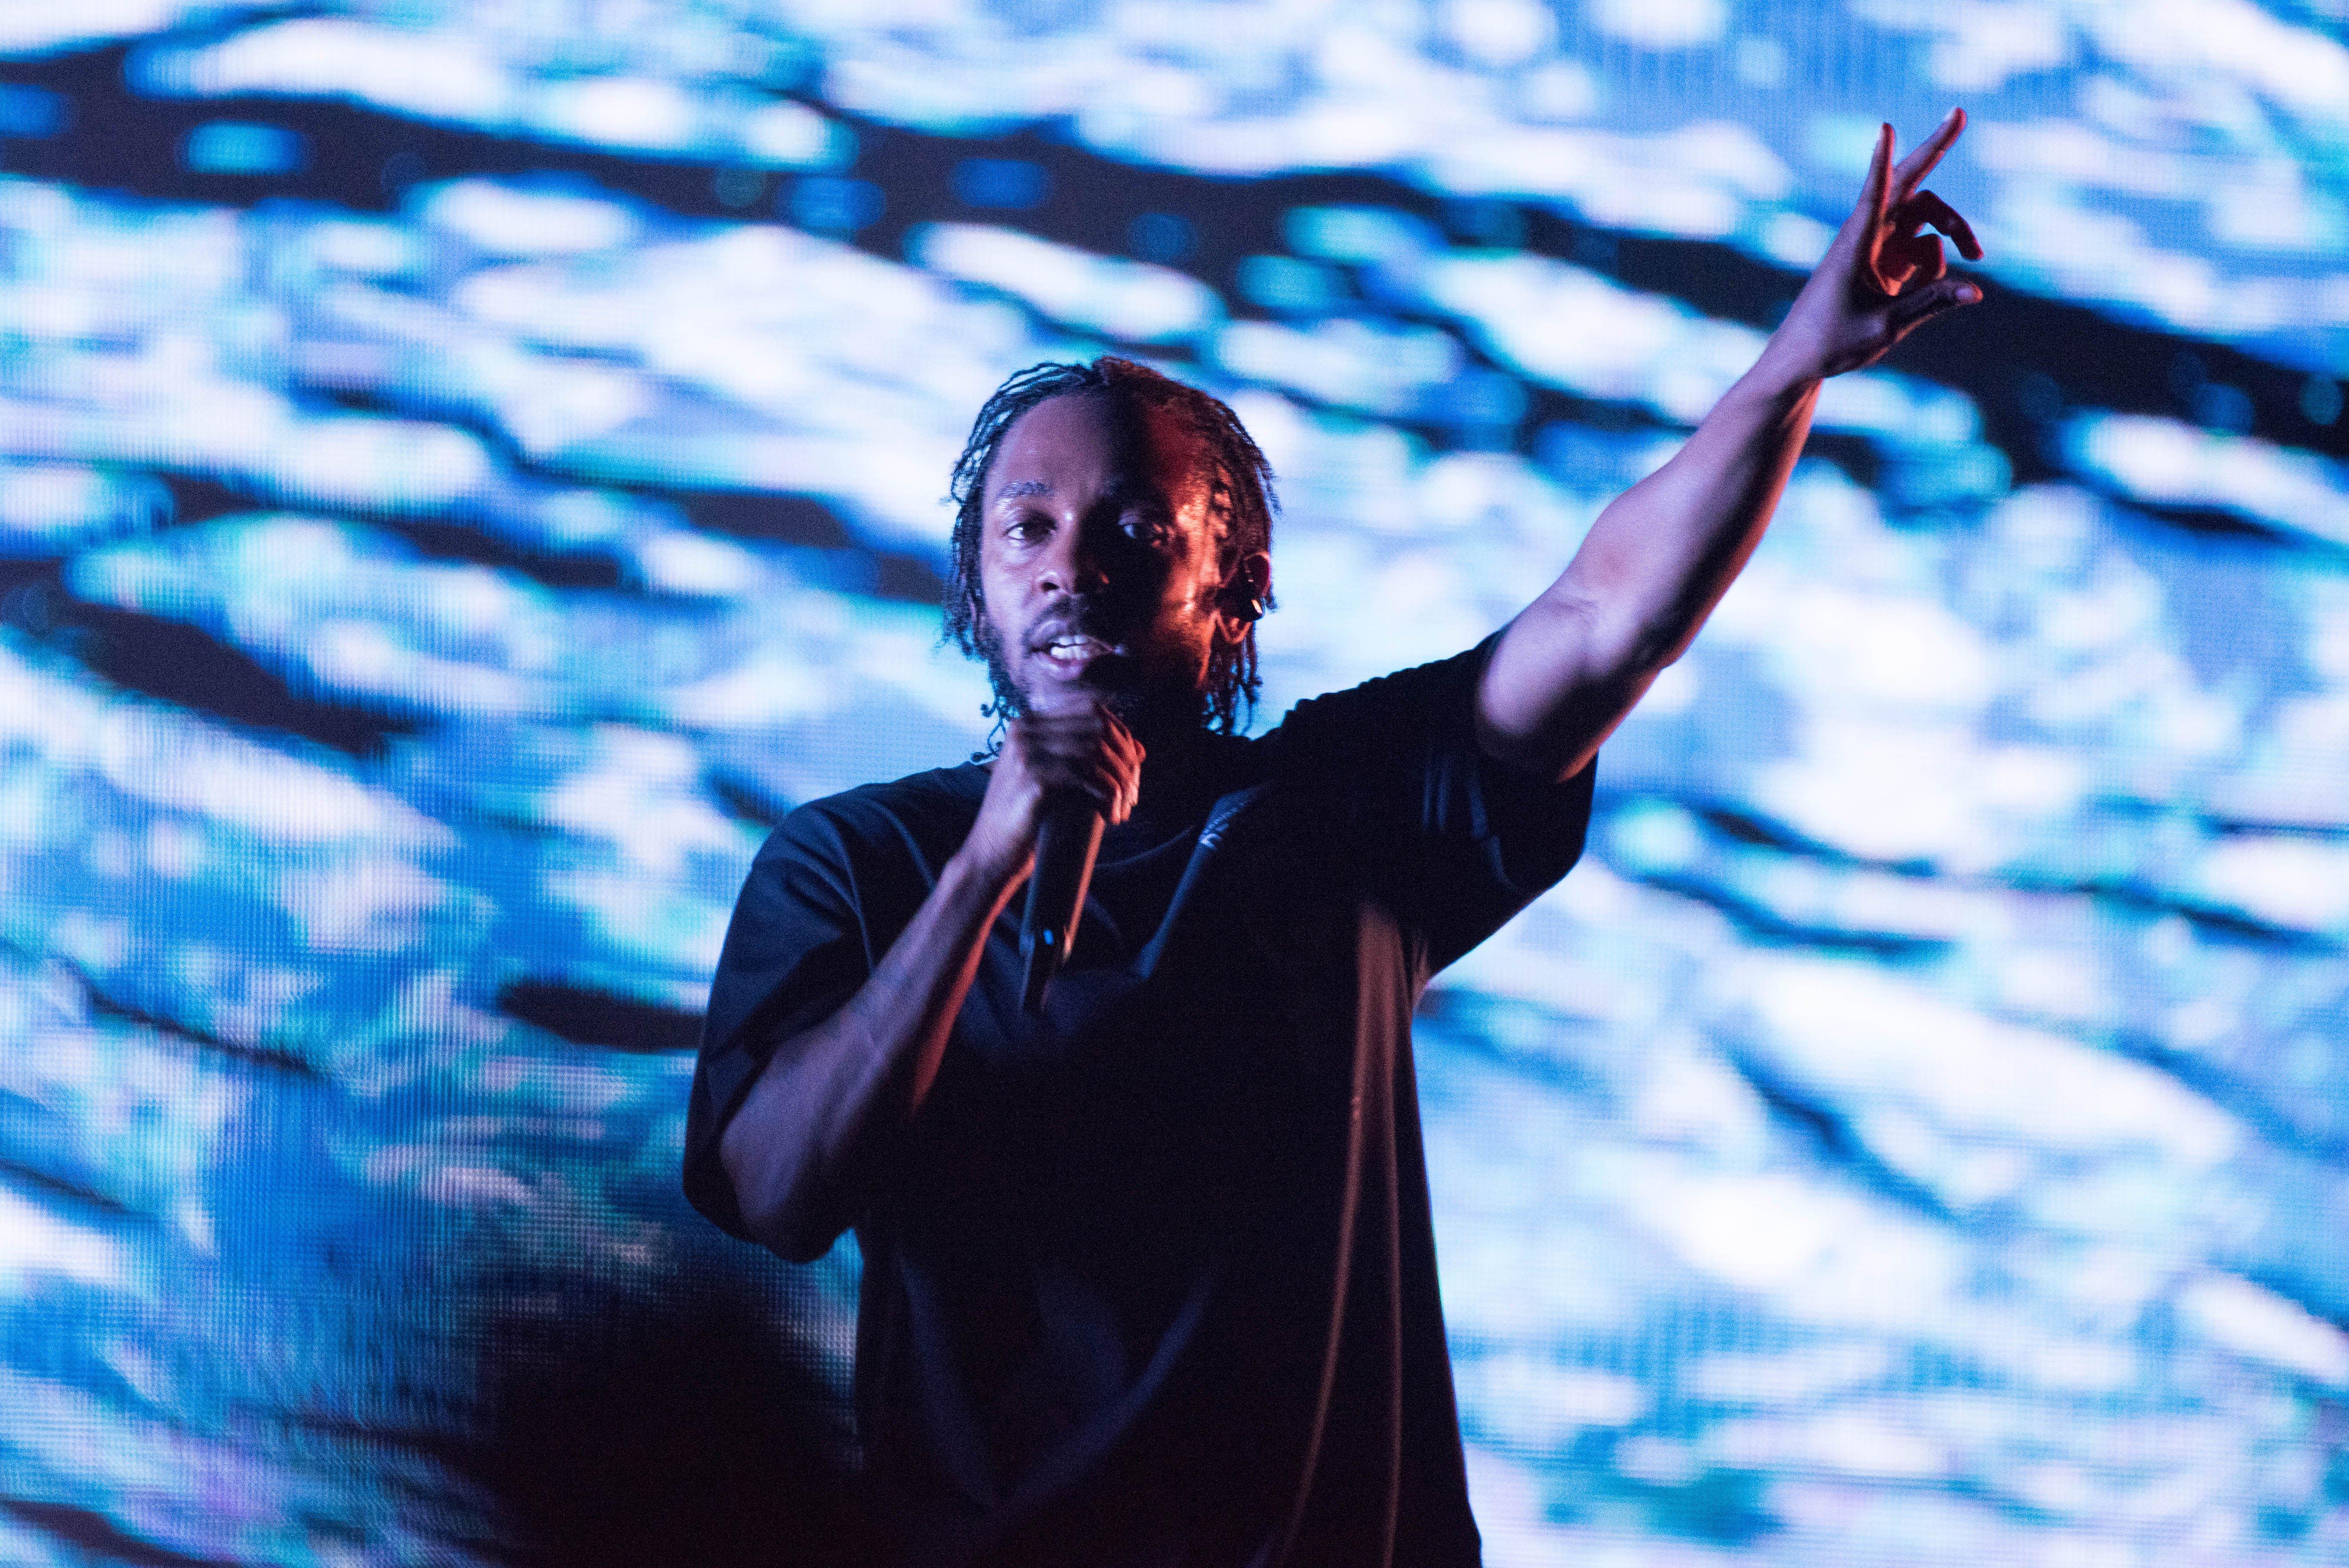 Kendrick Lamar Explained Why He's So Private in a Rare New Interview